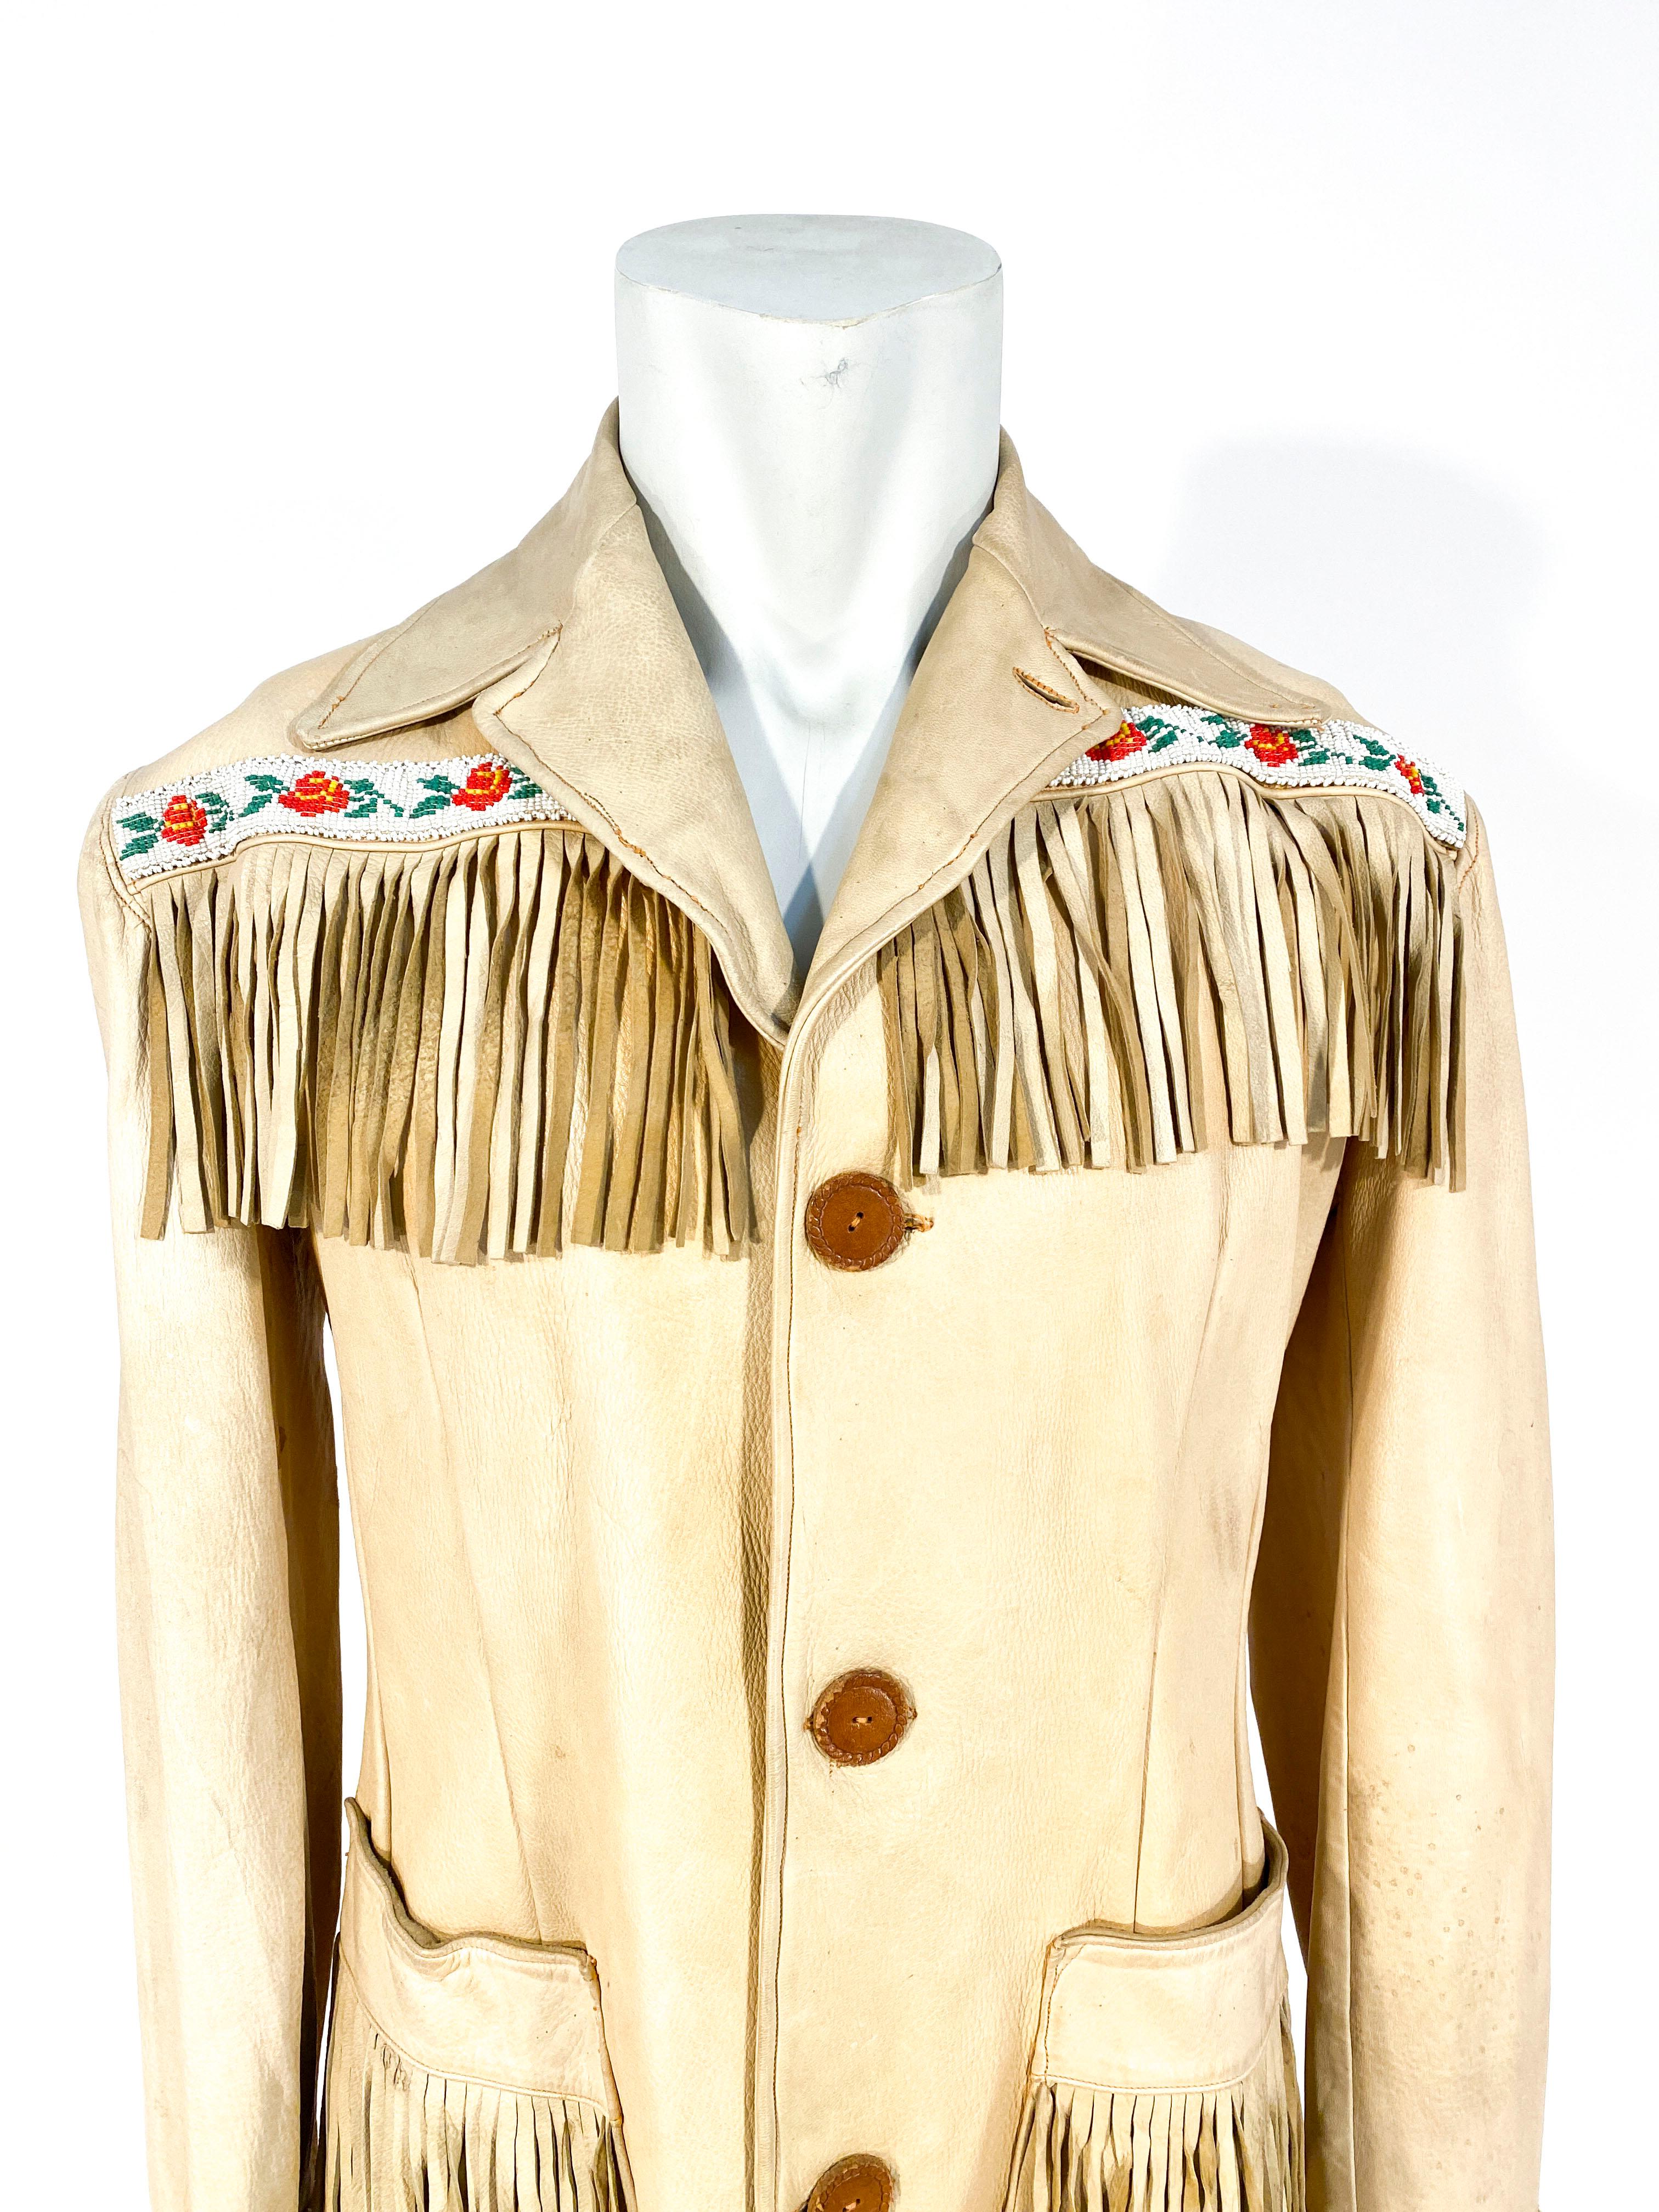 1950s elk hide handmade jacket with fringe along the hem, pockets, sleeves, and across the back. The face of the jacket is decorated with handmade leather buttons and beaded trim on both cuffs.